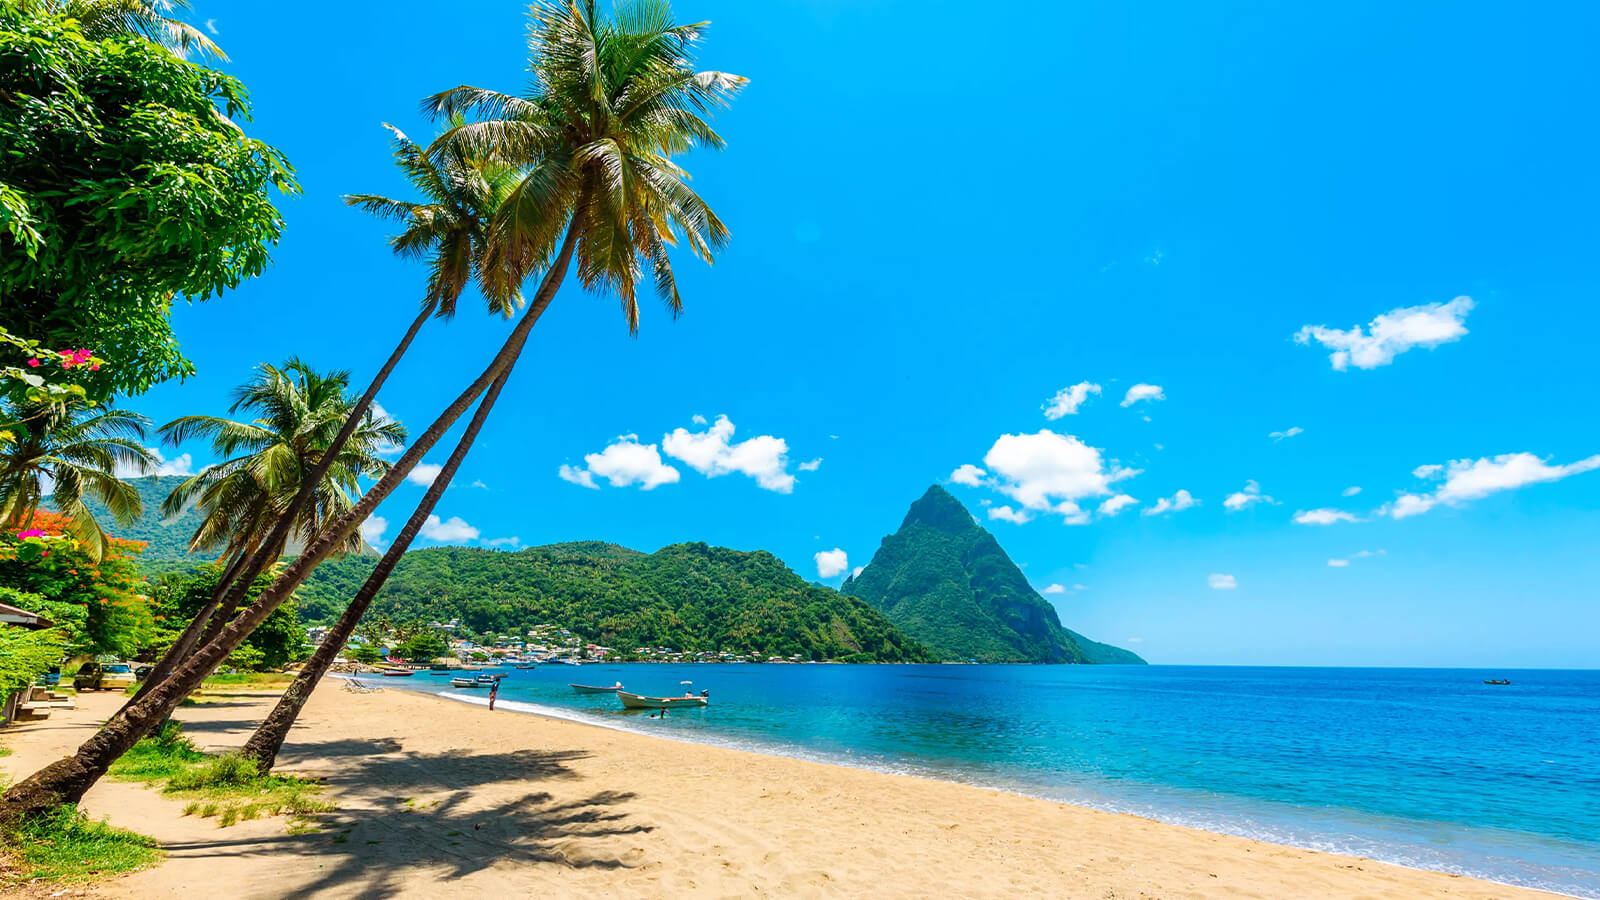 Image of Castries, St Lucia